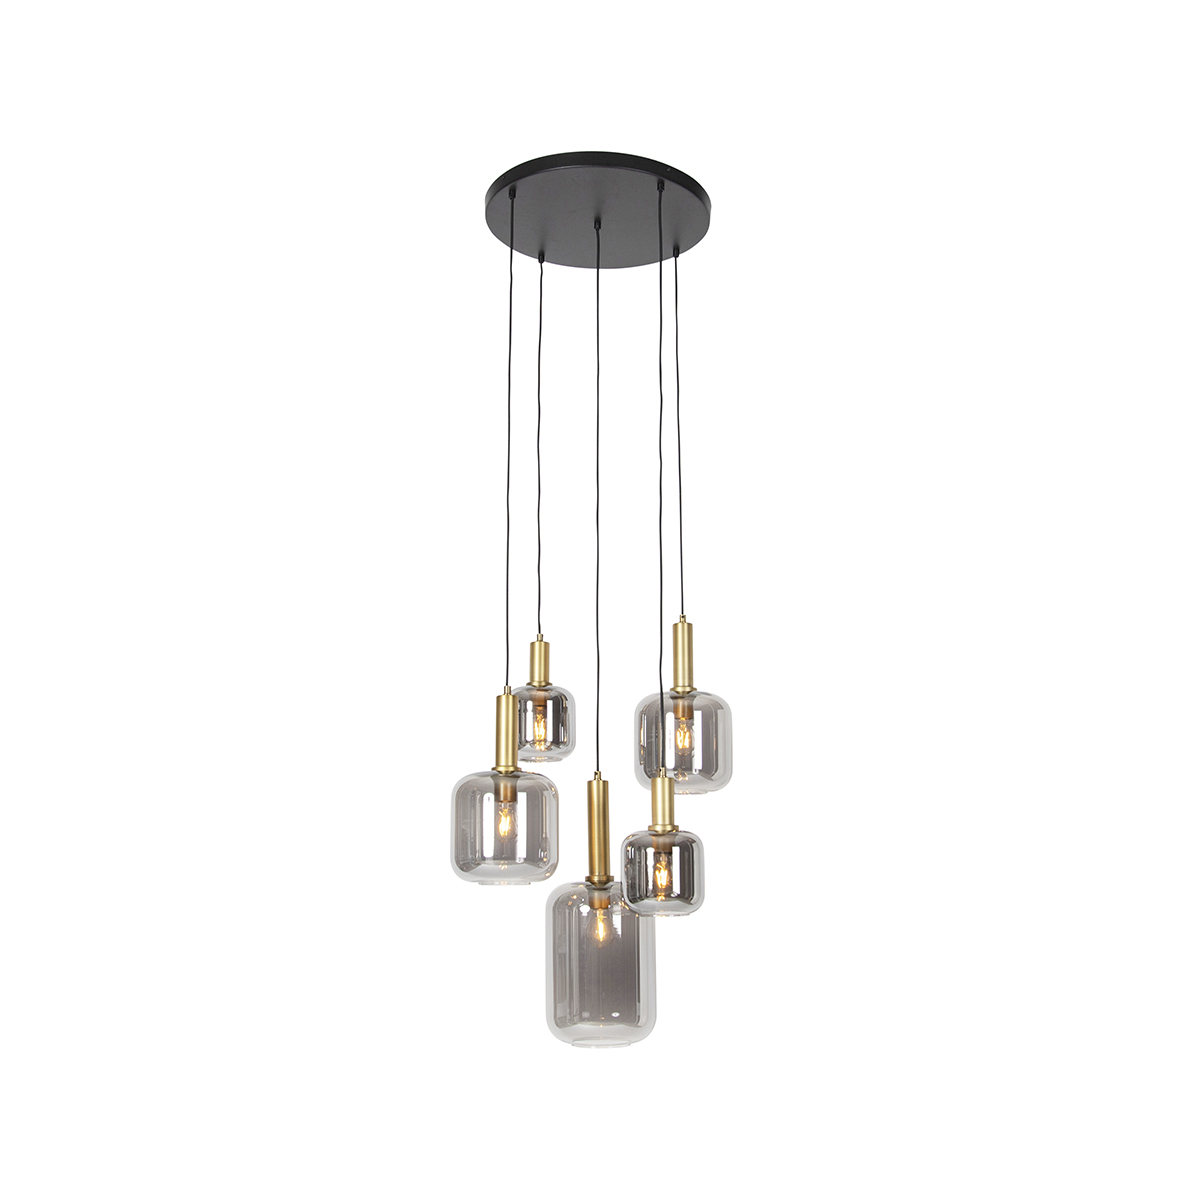 Hanging lamp black with gold with smoke glass 5 lights - Zuzanna